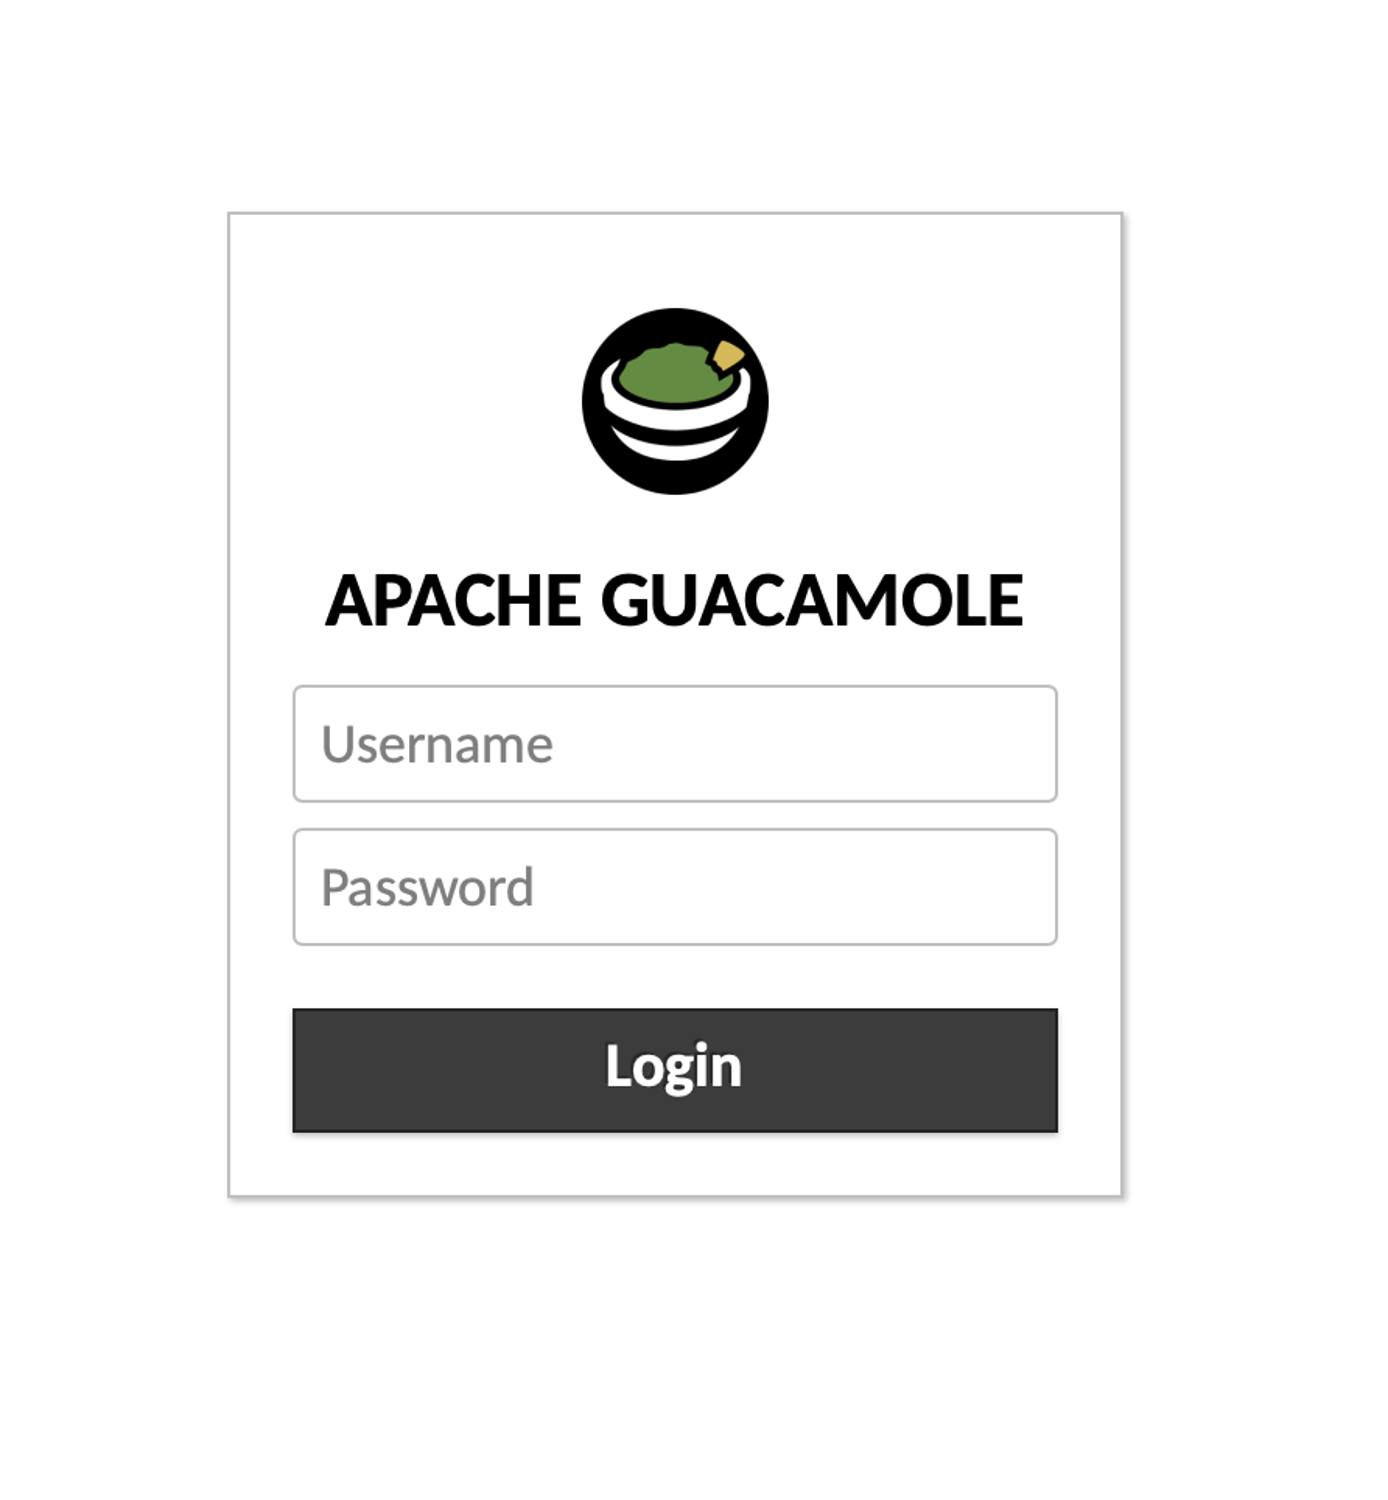 View the Guacamole login page.